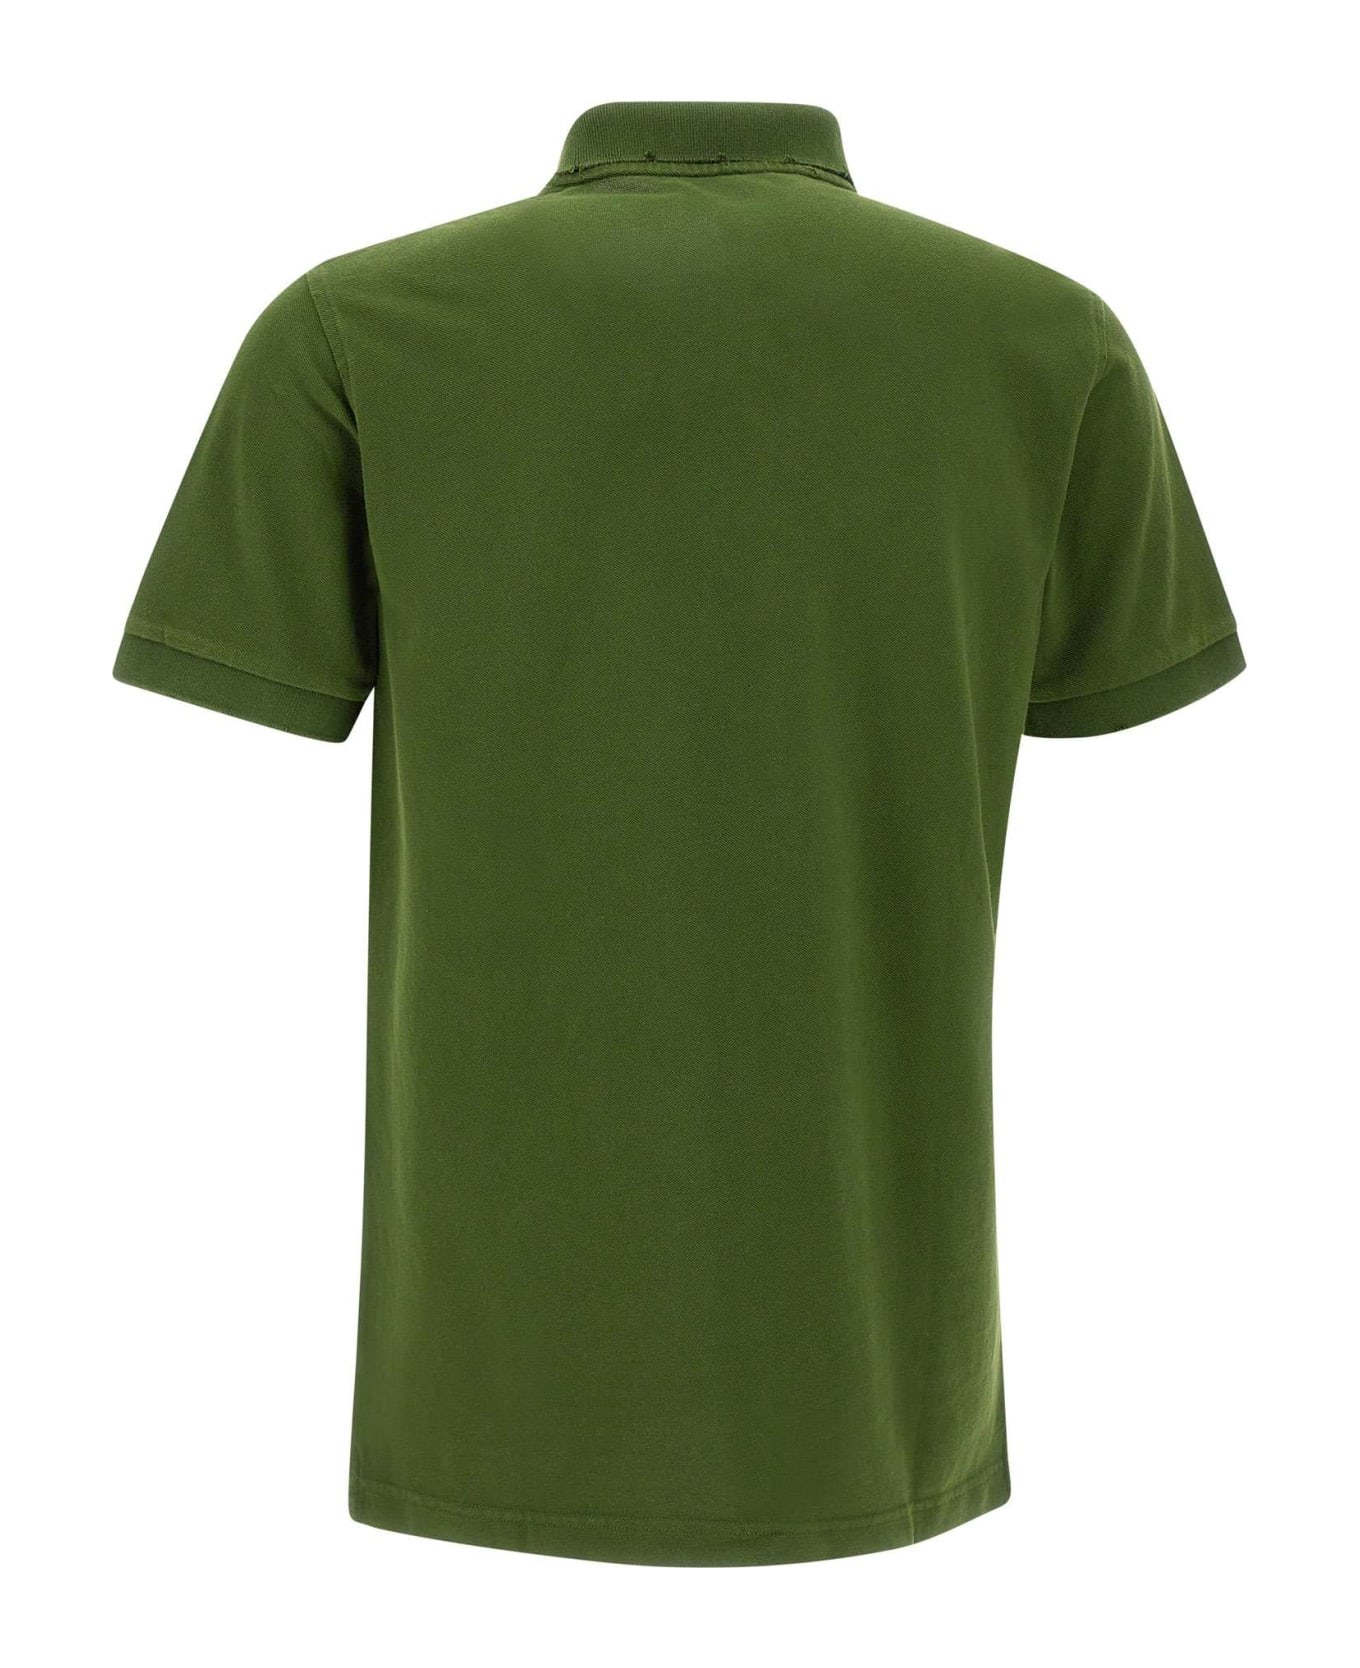 Sun 68 "solid" Cotton Polo Shirt - GREEN ポロシャツ